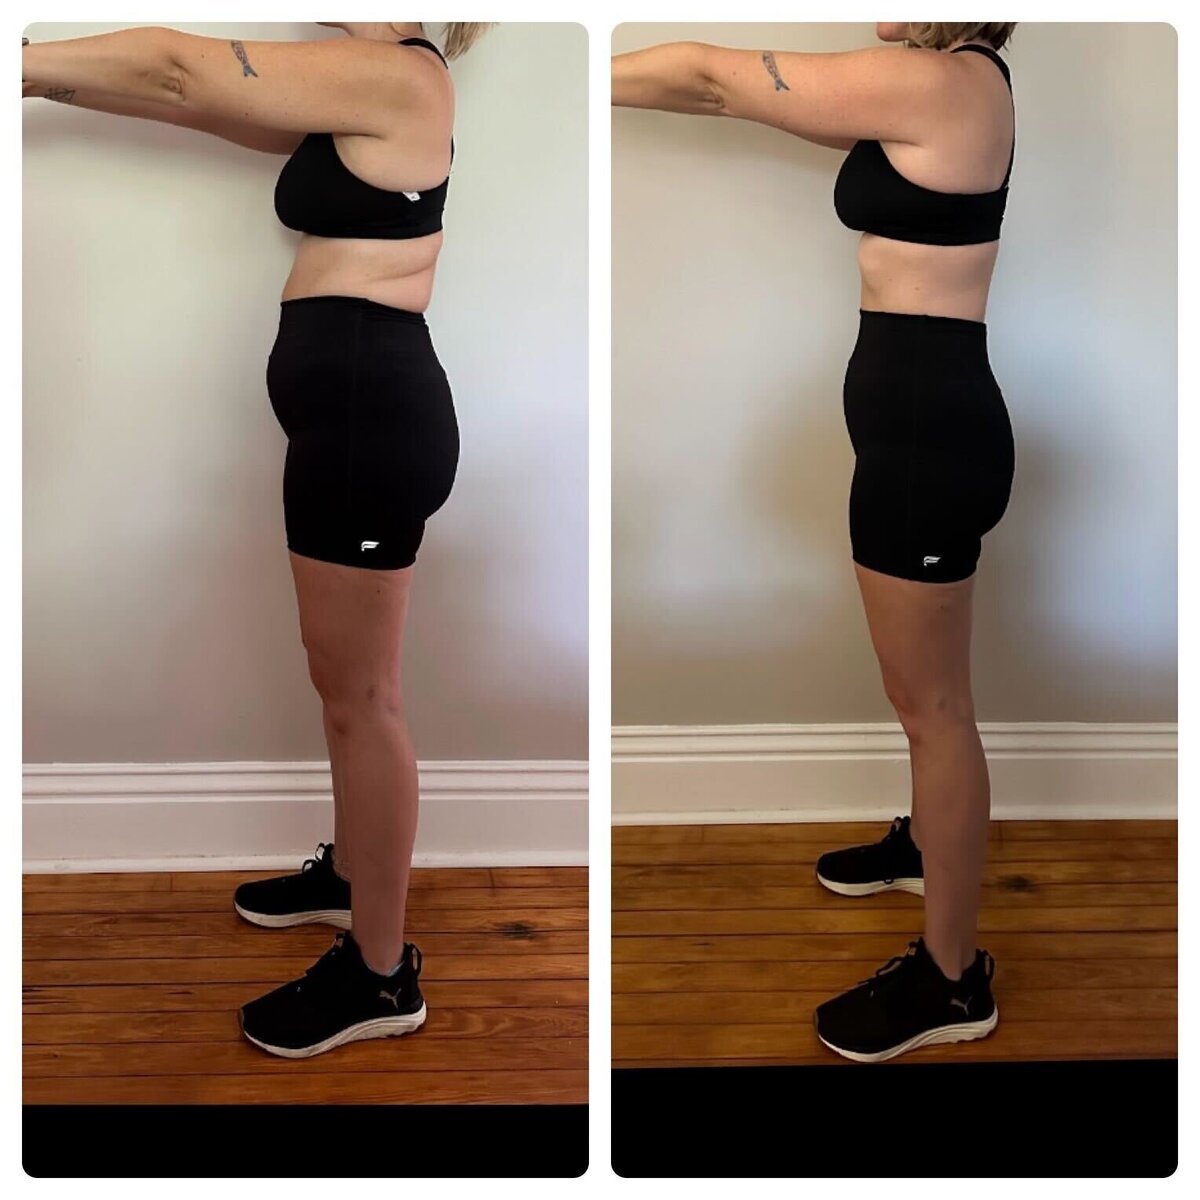 Copy of Sam Smart - 16 weeks_ -8.5lbs and 12.5 in - 2